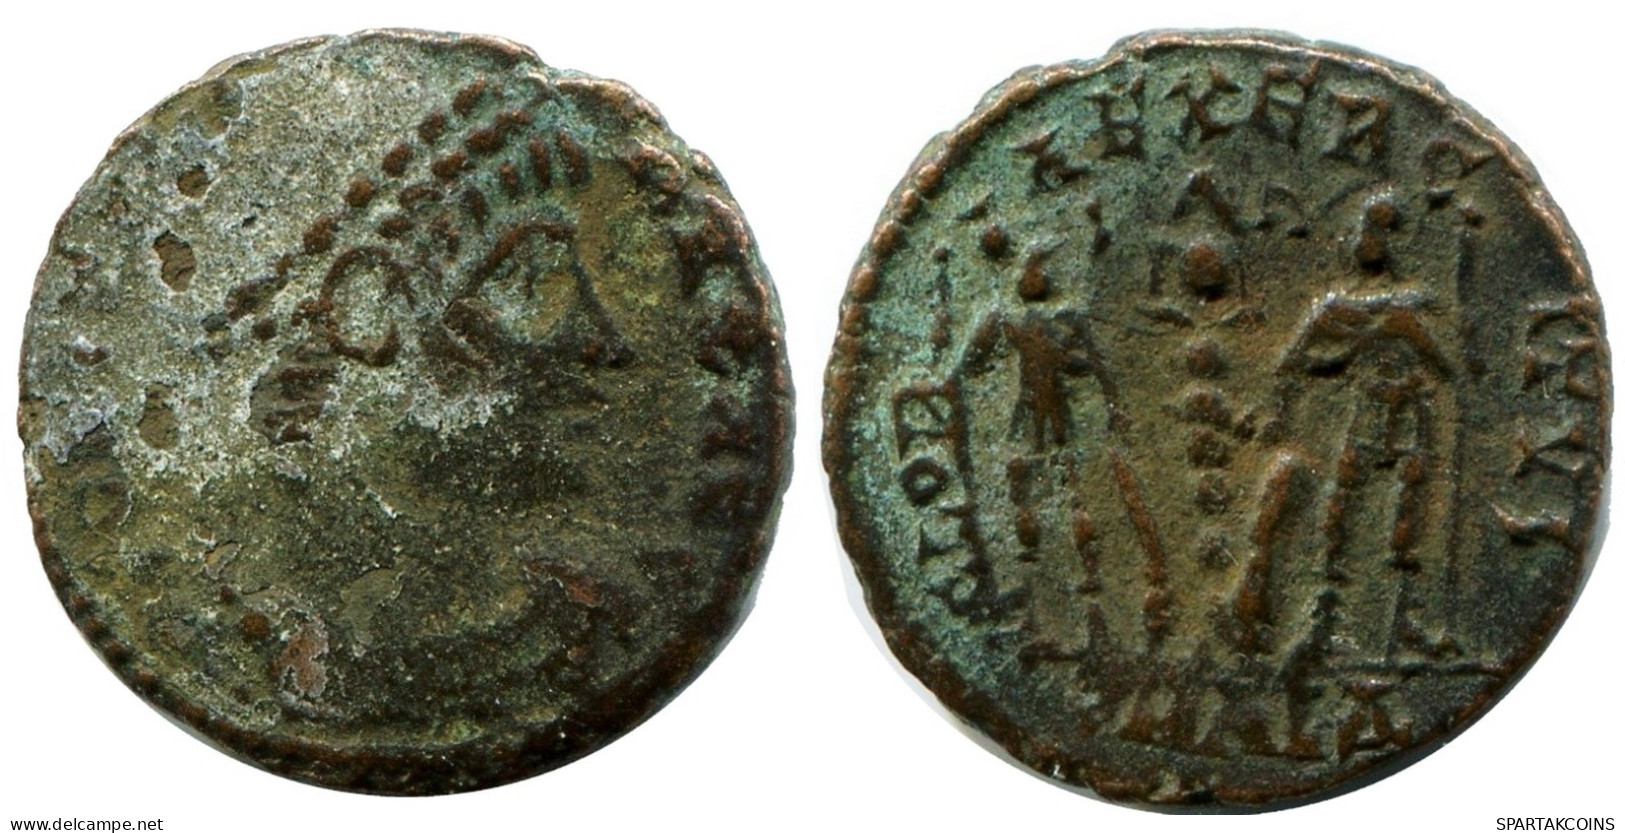 CONSTANS MINTED IN ALEKSANDRIA FROM THE ROYAL ONTARIO MUSEUM #ANC11409.14.E.A - El Imperio Christiano (307 / 363)